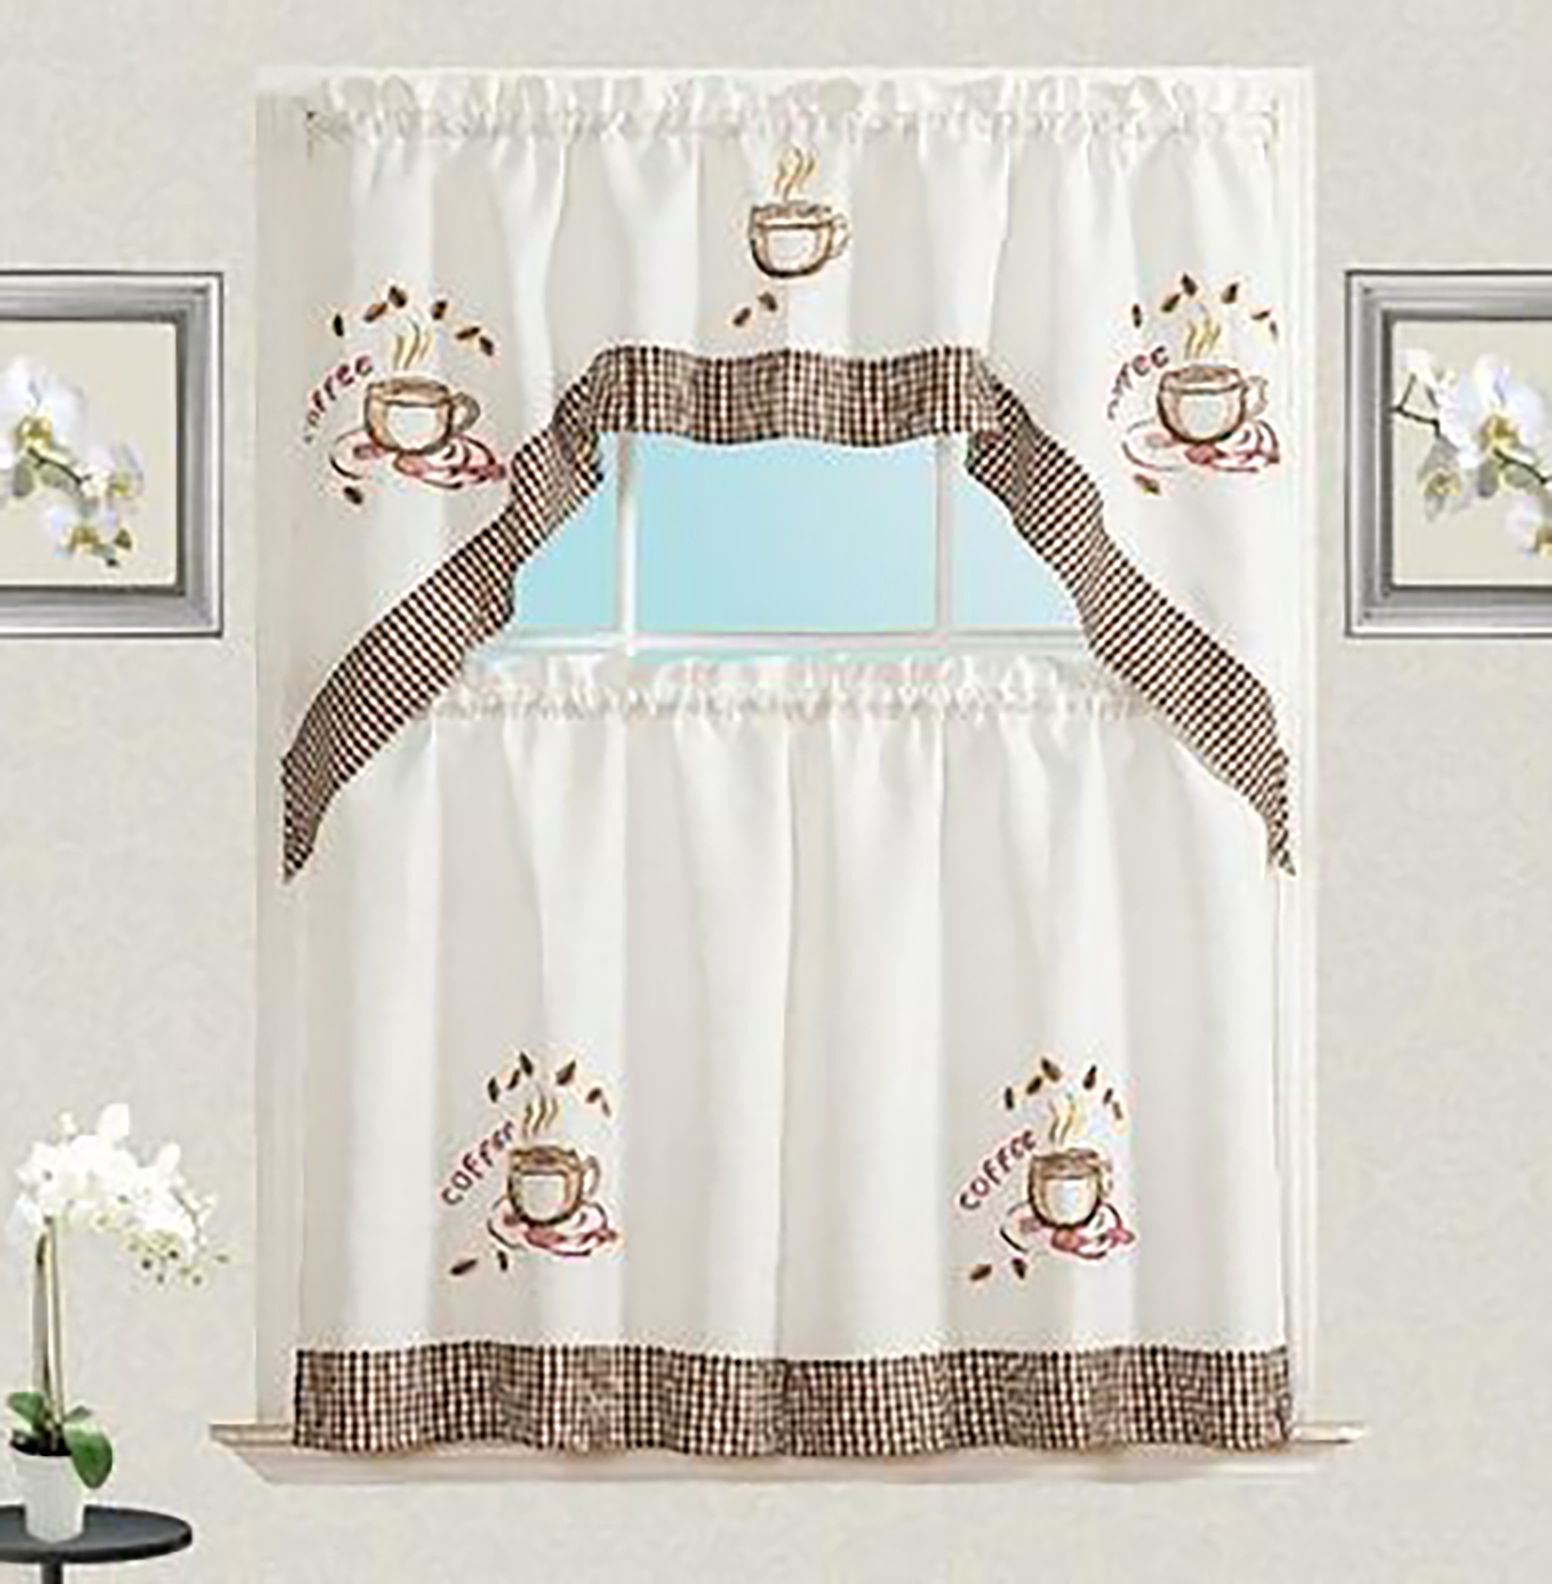 Cream Coffee Cup Design Embroidery Kitchen Curtain With Swag And Tier Set 36 With Coffee Embroidered Kitchen Curtain Tier Sets (View 18 of 20)